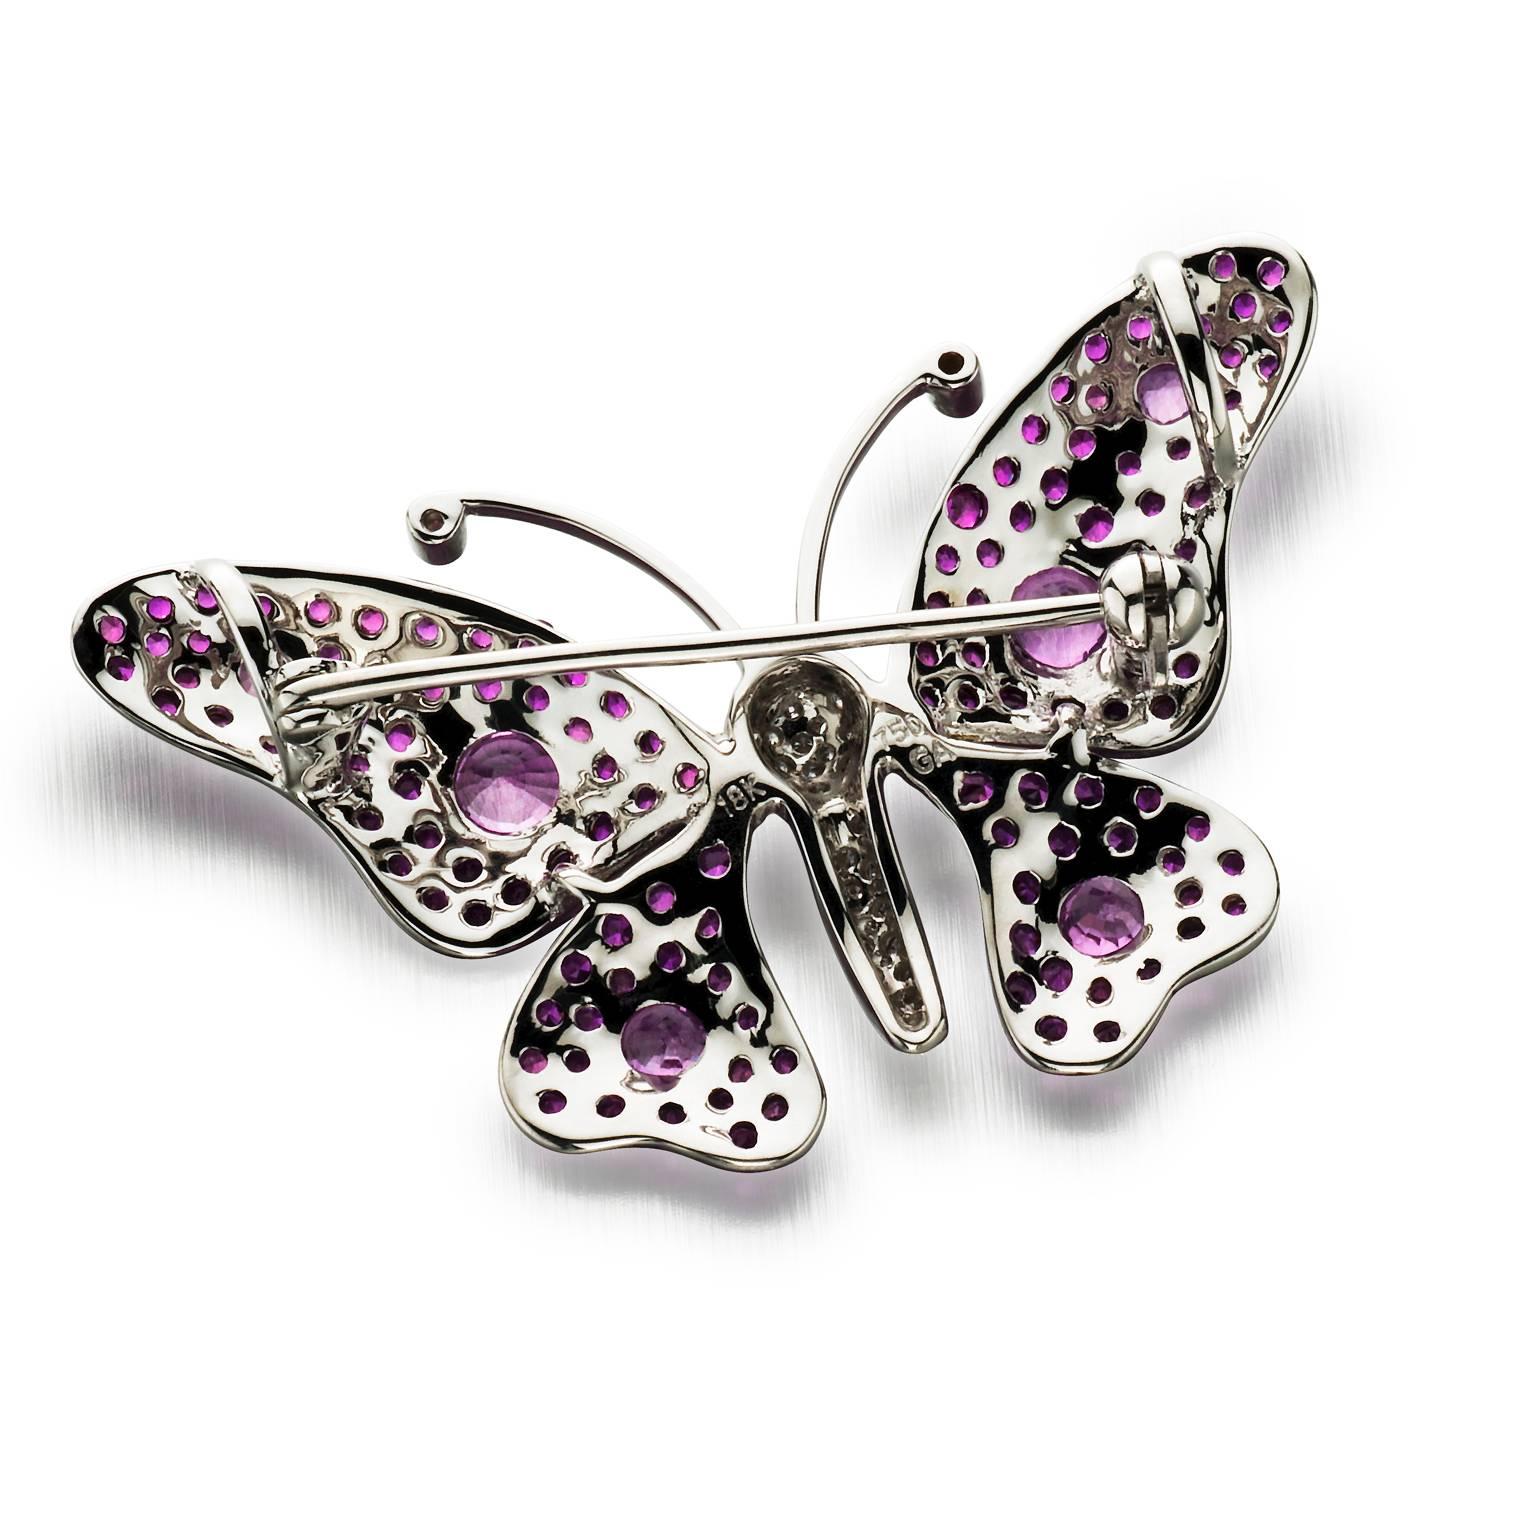 Accent that little black dress with a pop of color. Stylized 18k white gold butterfly brooch featuring hot pink spinels on wings, accented with six round pink sapphires. Body is pave set with round brilliant cut diamonds.

1.30 cttw Pink